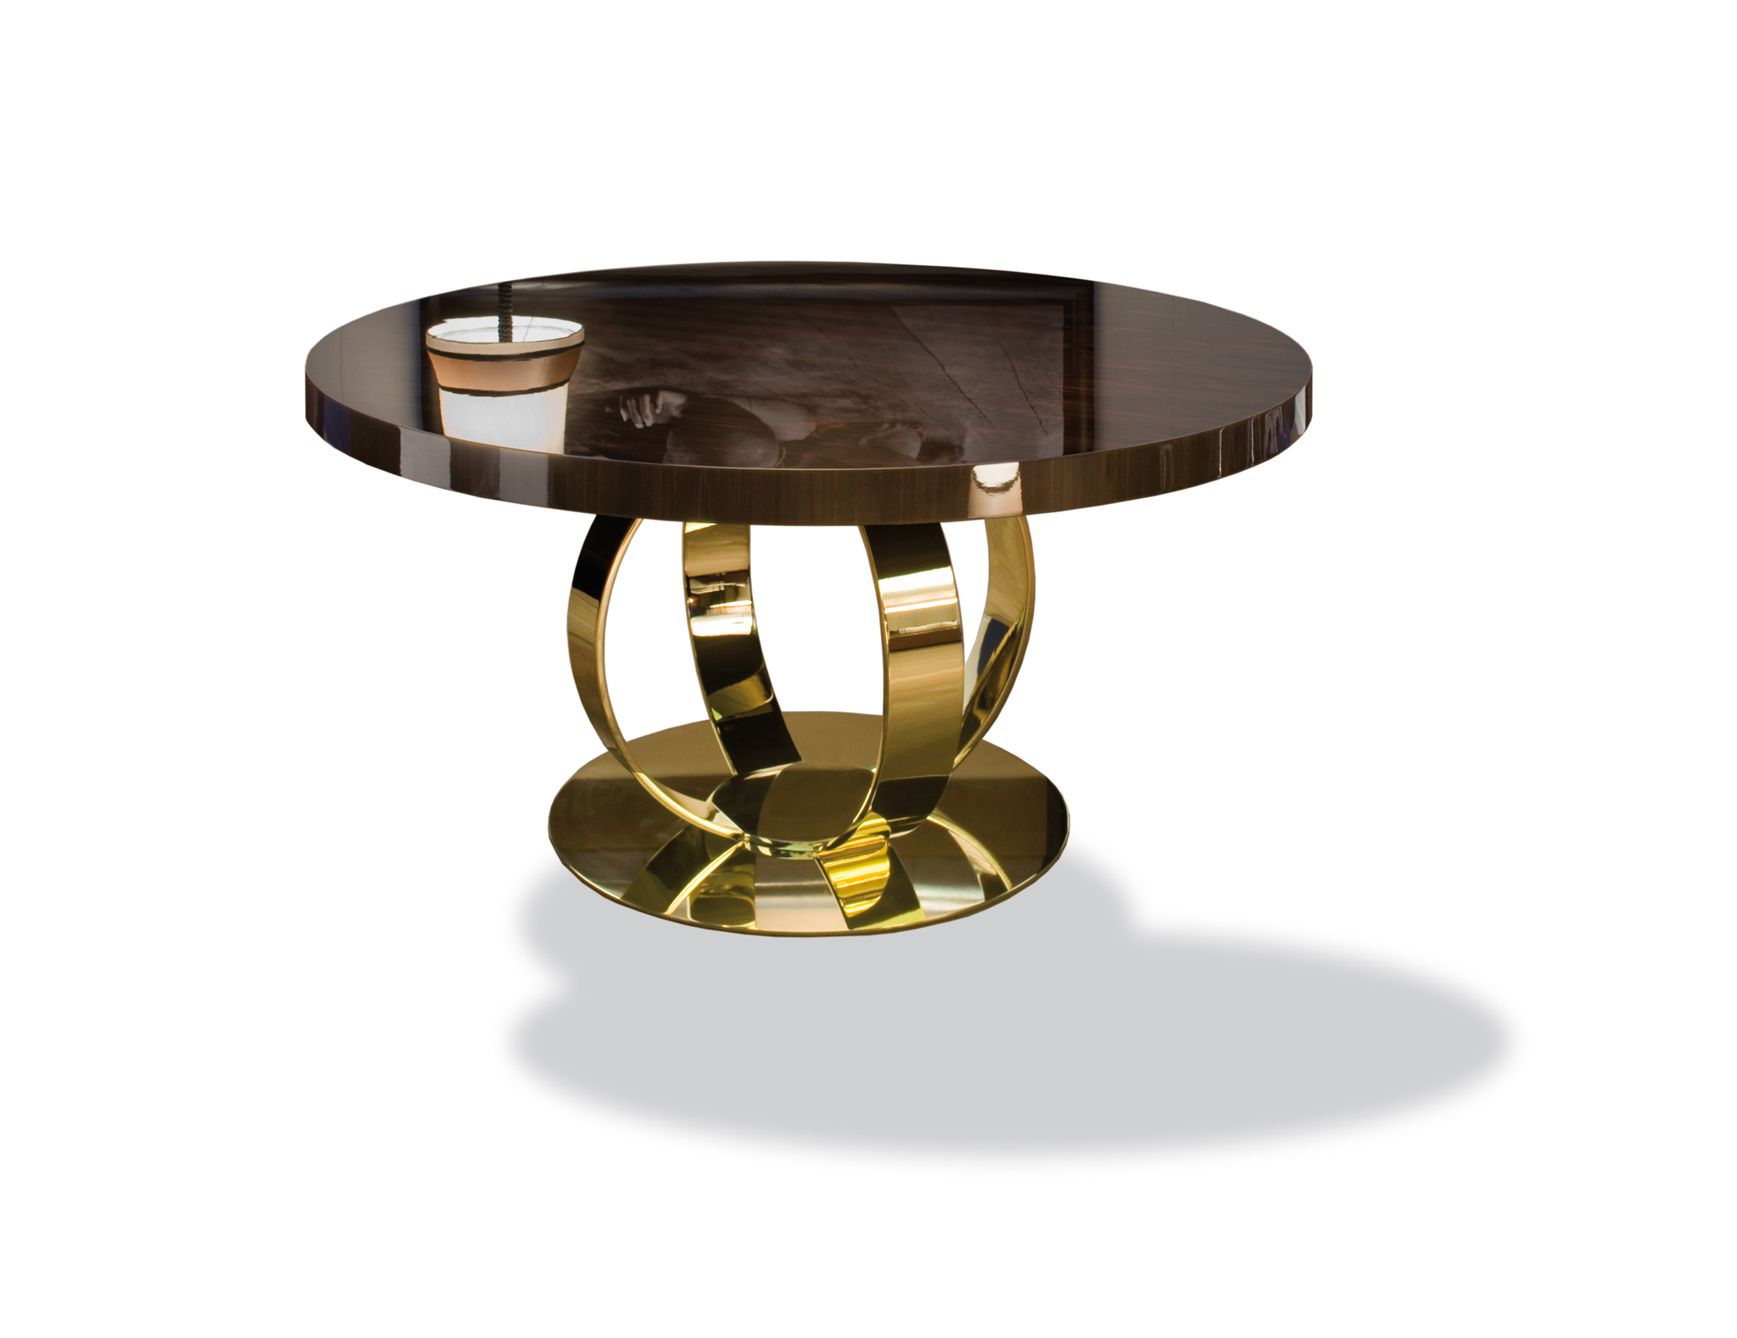 Best And Newest Nella Vetrina Andrew Modern Italian Designer Round Wood Throughout Dom Round Dining Tables (View 8 of 25)